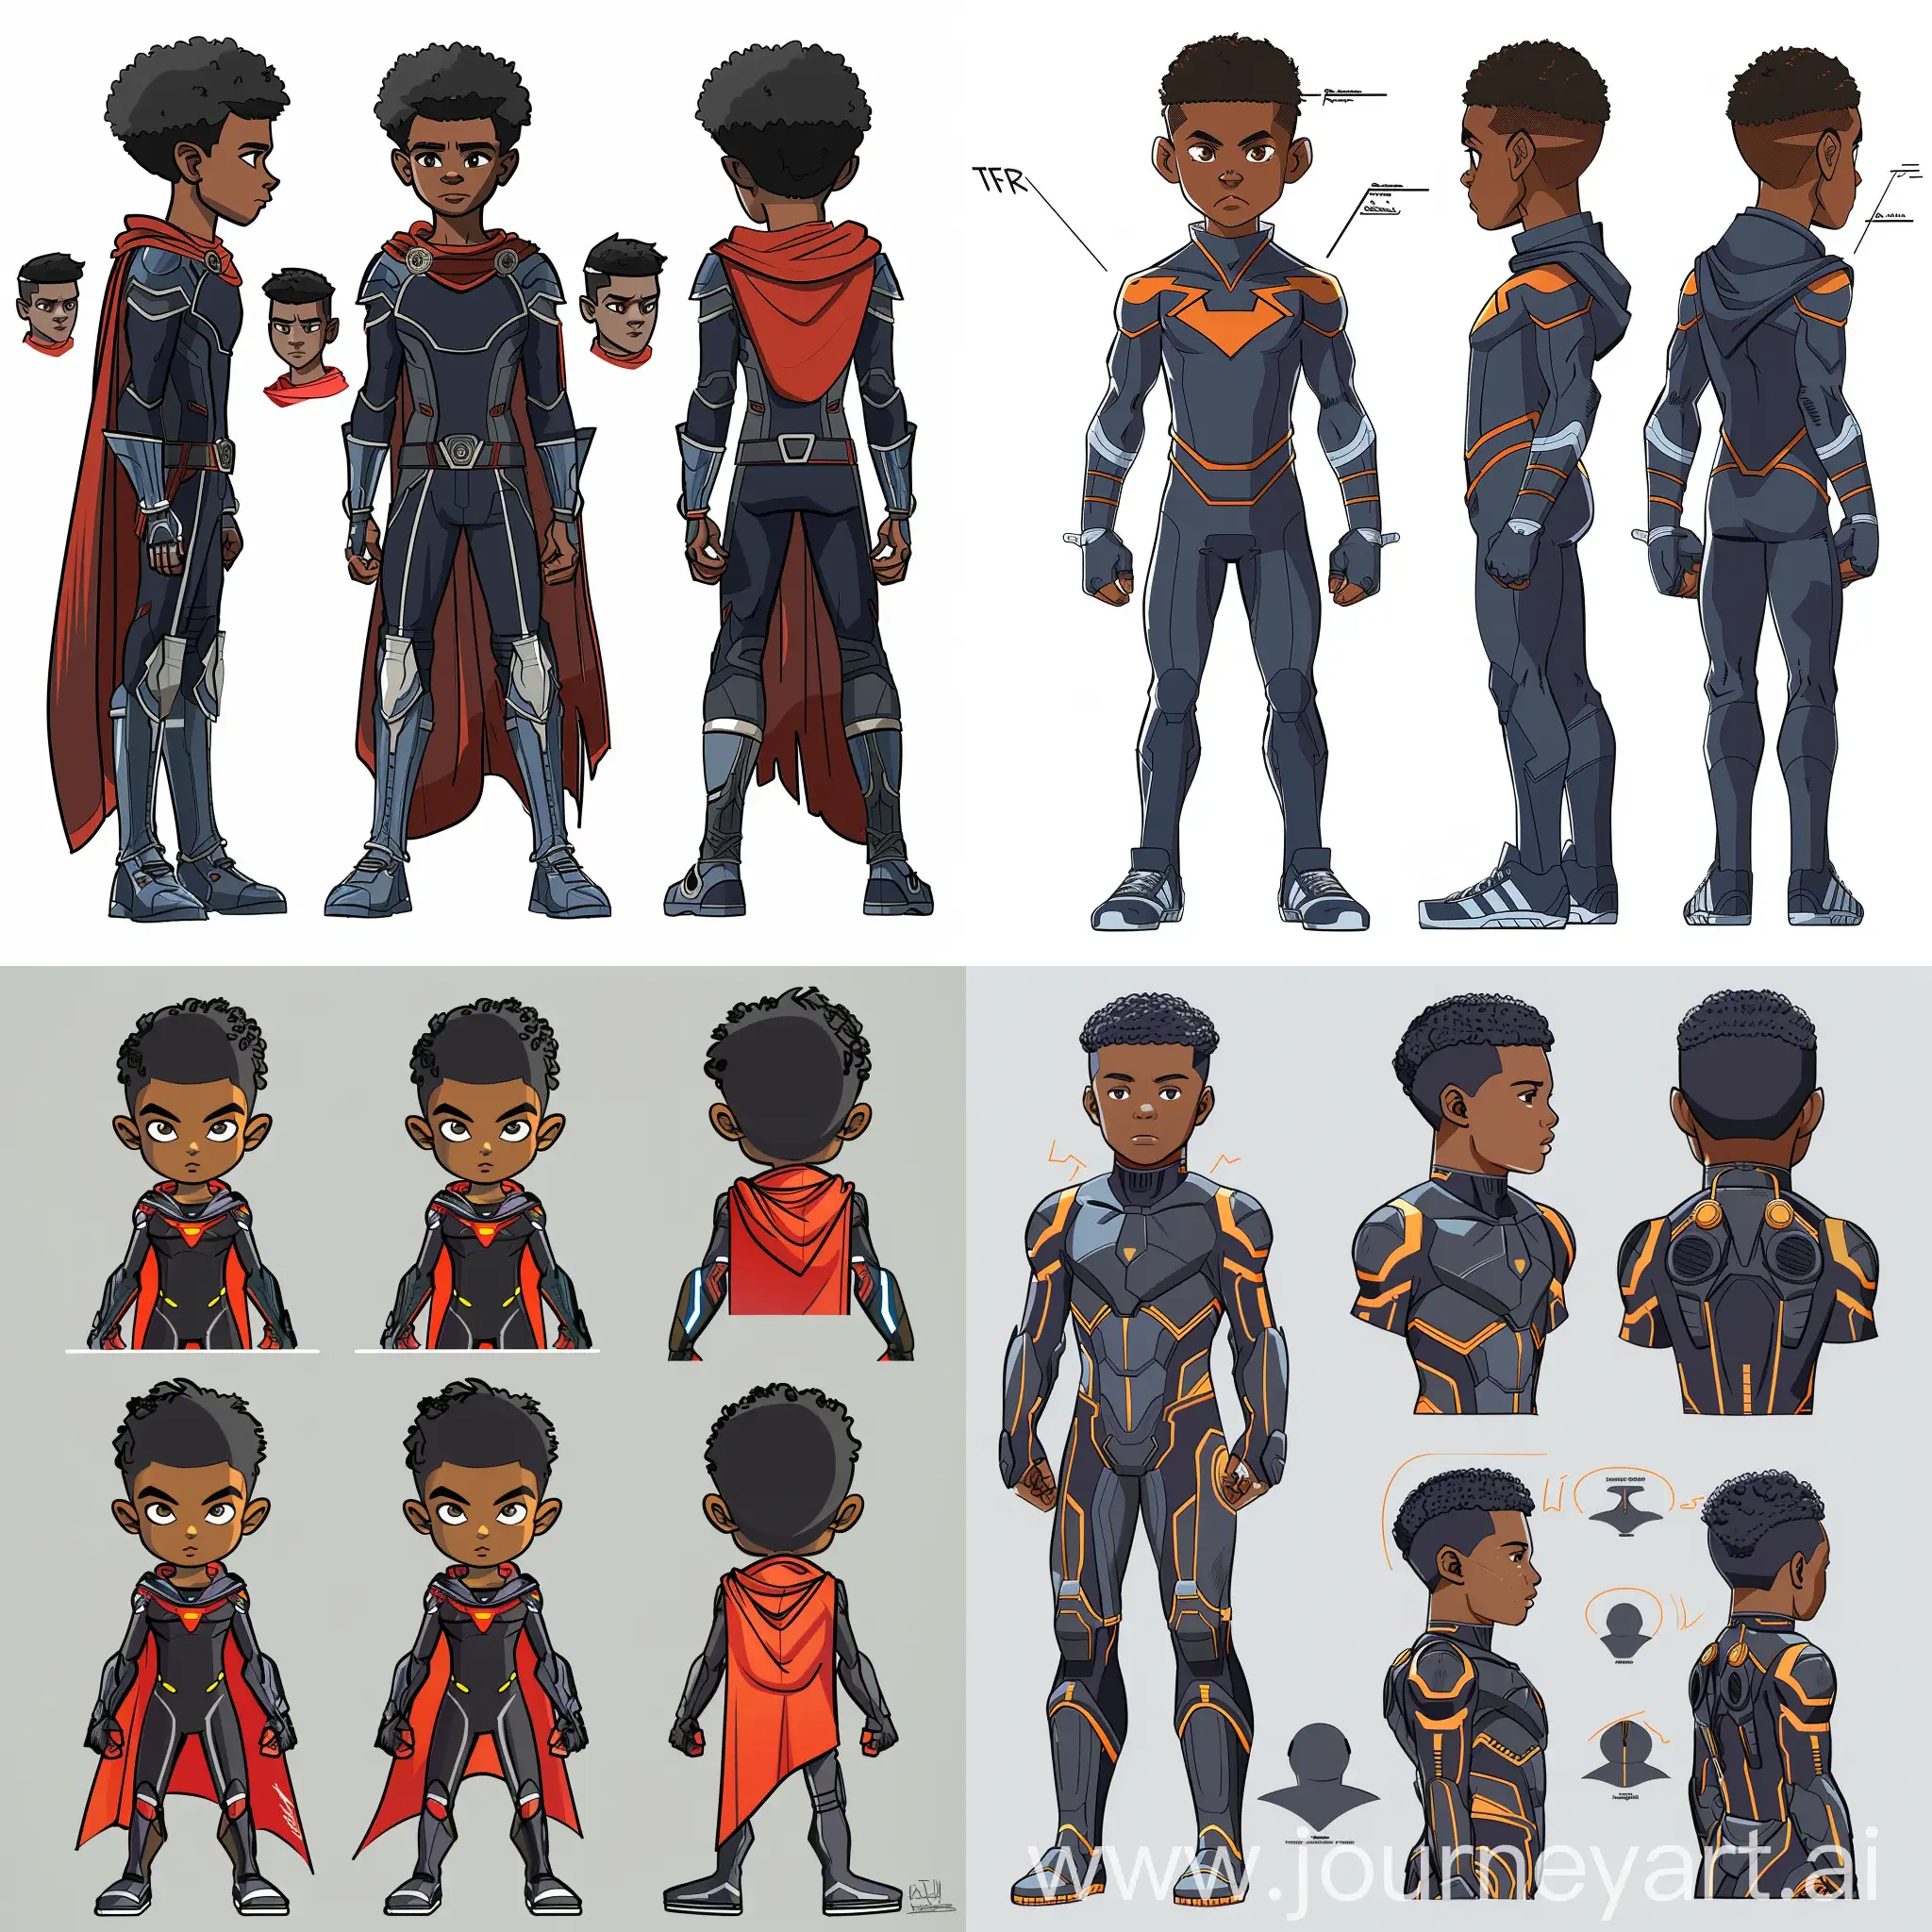 Anime-Style-African-Male-Superhero-Character-Design